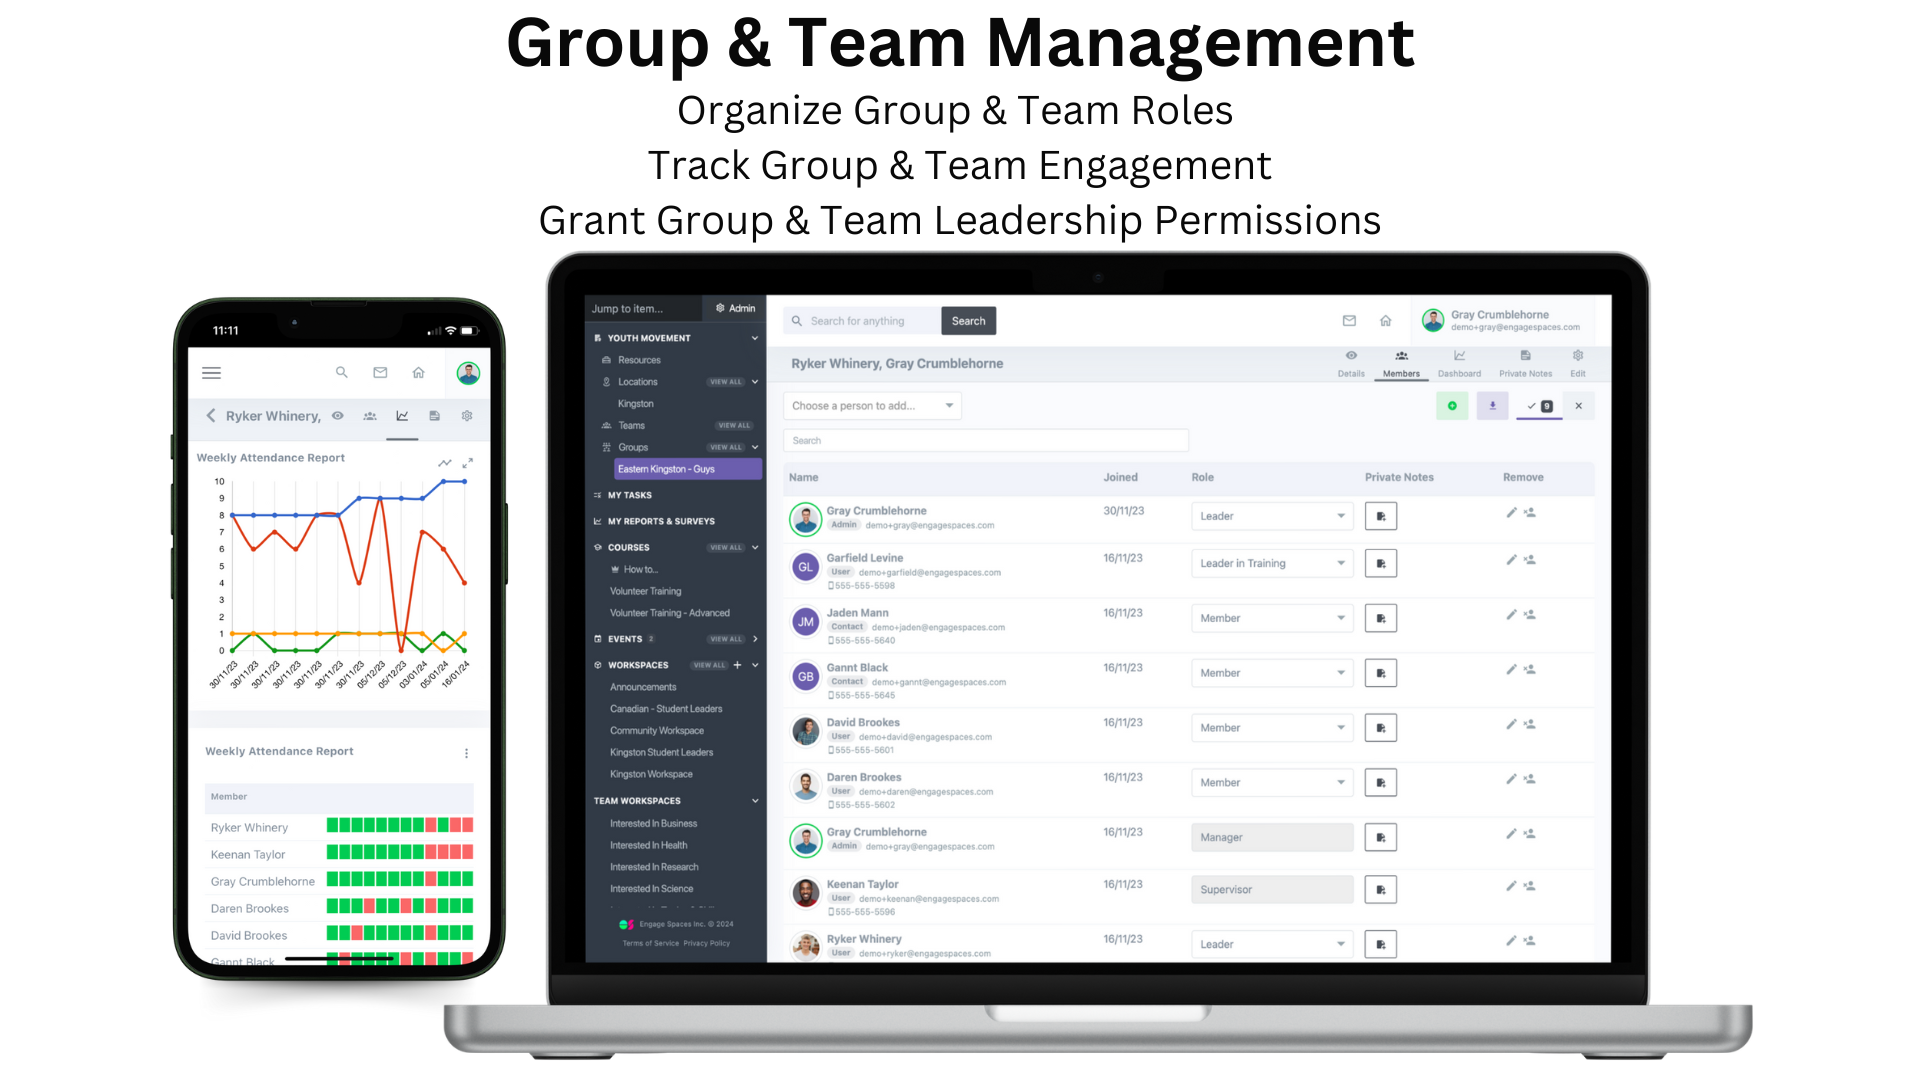 Allow each Team Leader to oversee their Team Members. Track their engagement and attendance, take private notes, and allow team leaders to automate their members' enrolment into Courses, Events, and Workspaces.